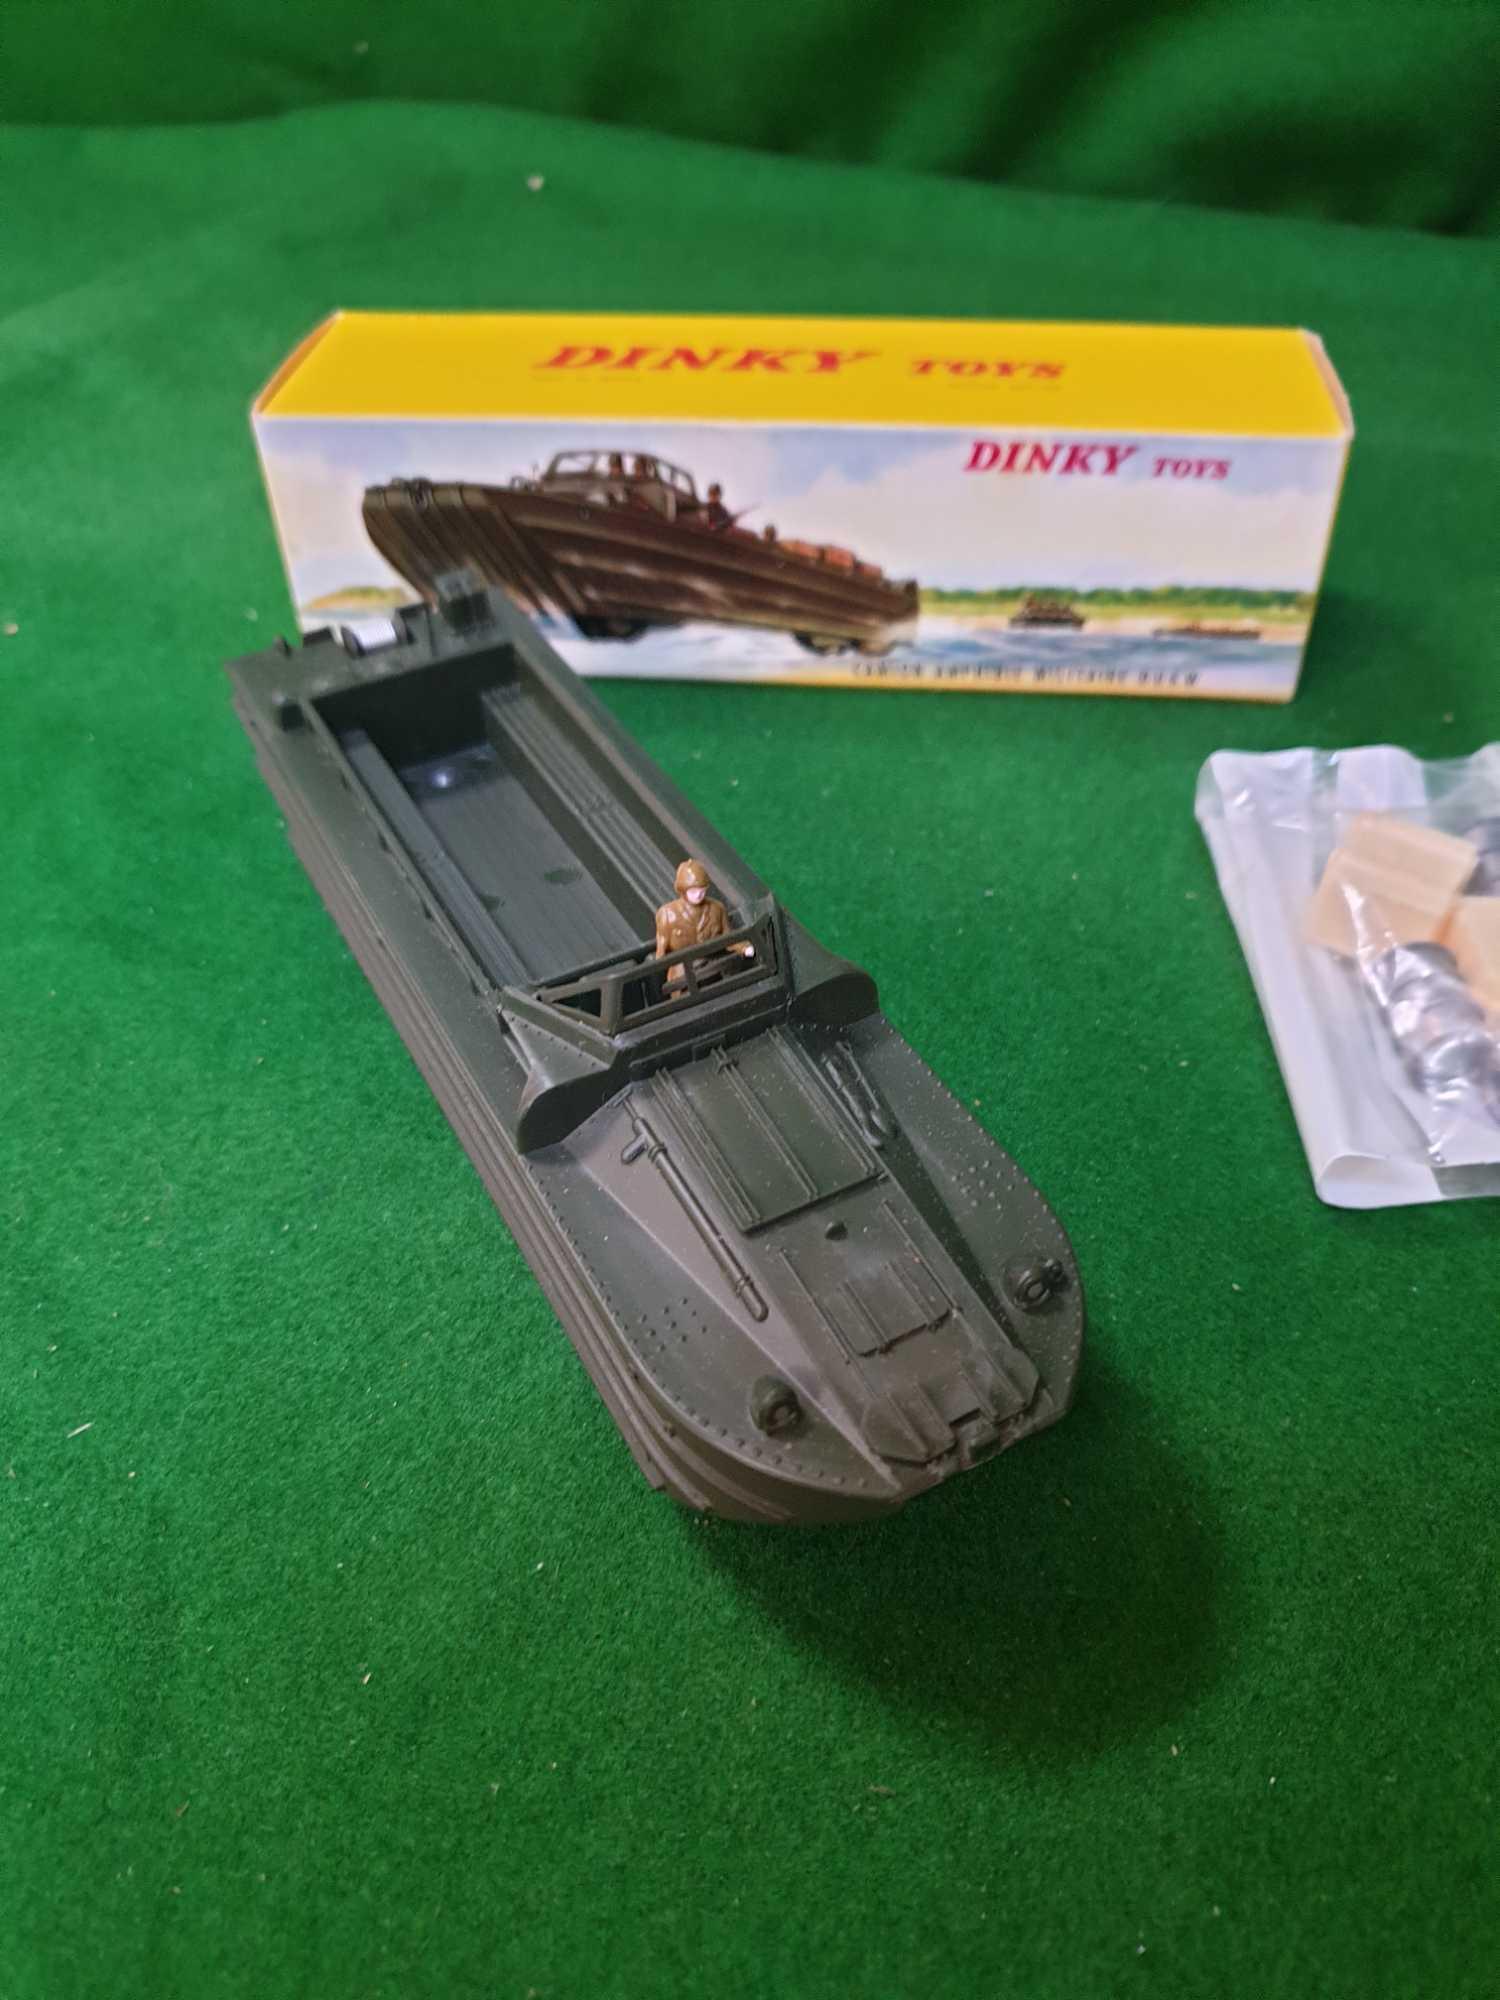 Dinky France #825 Camion Amphibian Vehicle - Amphibian Militaire DUKW Comes With Barrels And Cases - Image 4 of 4